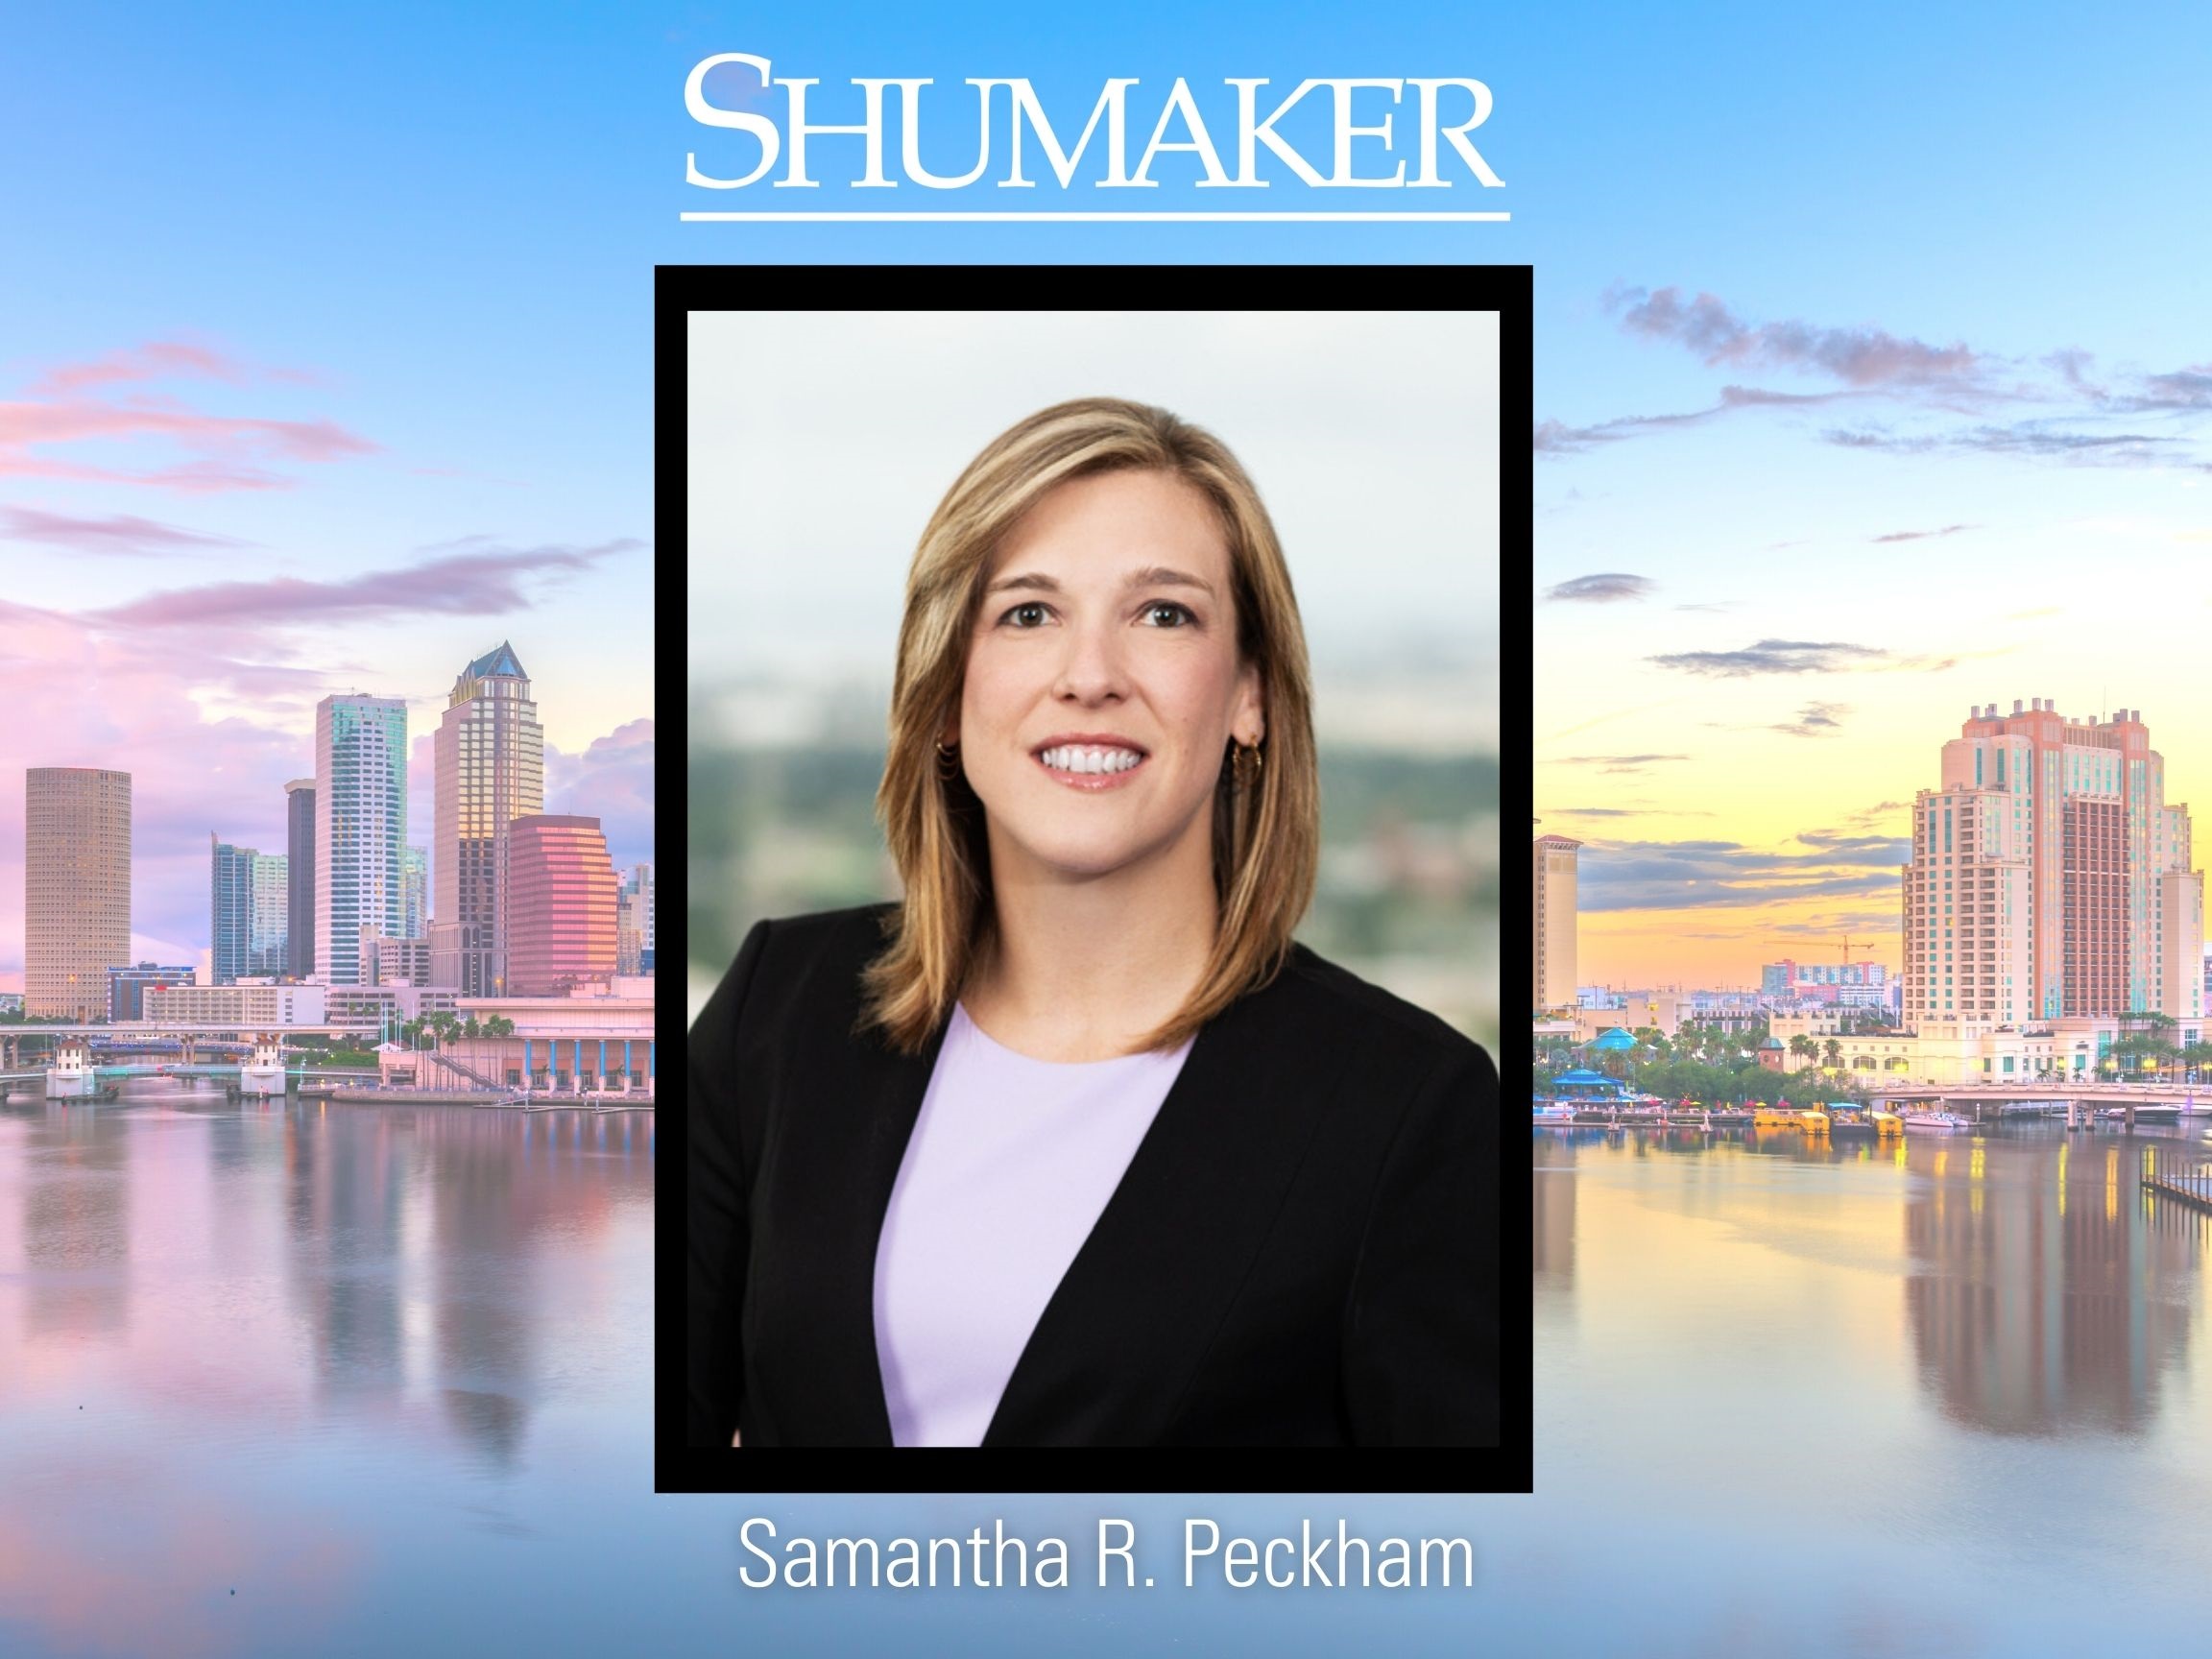 Samantha Peckham Appointed to the Tampa Club Board of Directors